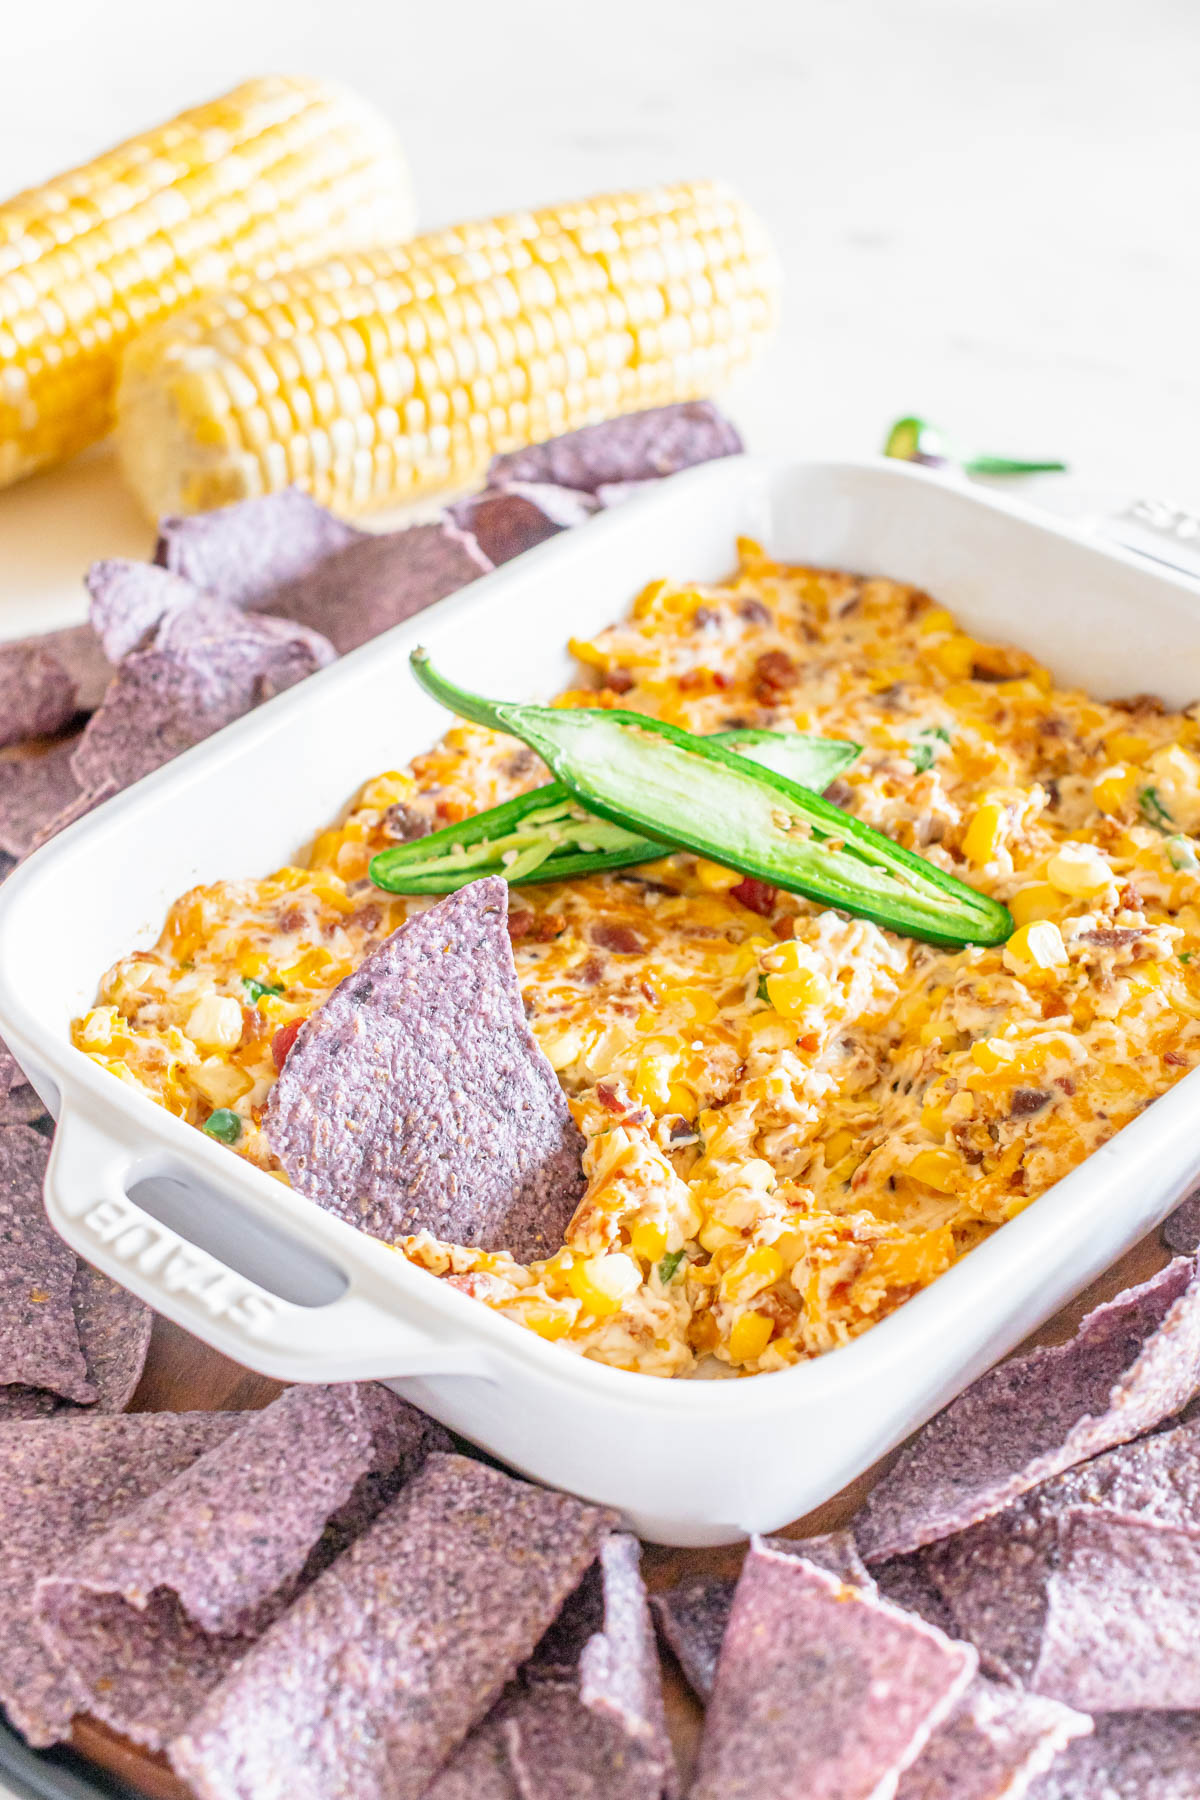 Cheesy corn dip with tortilla chips and corn on the cob.